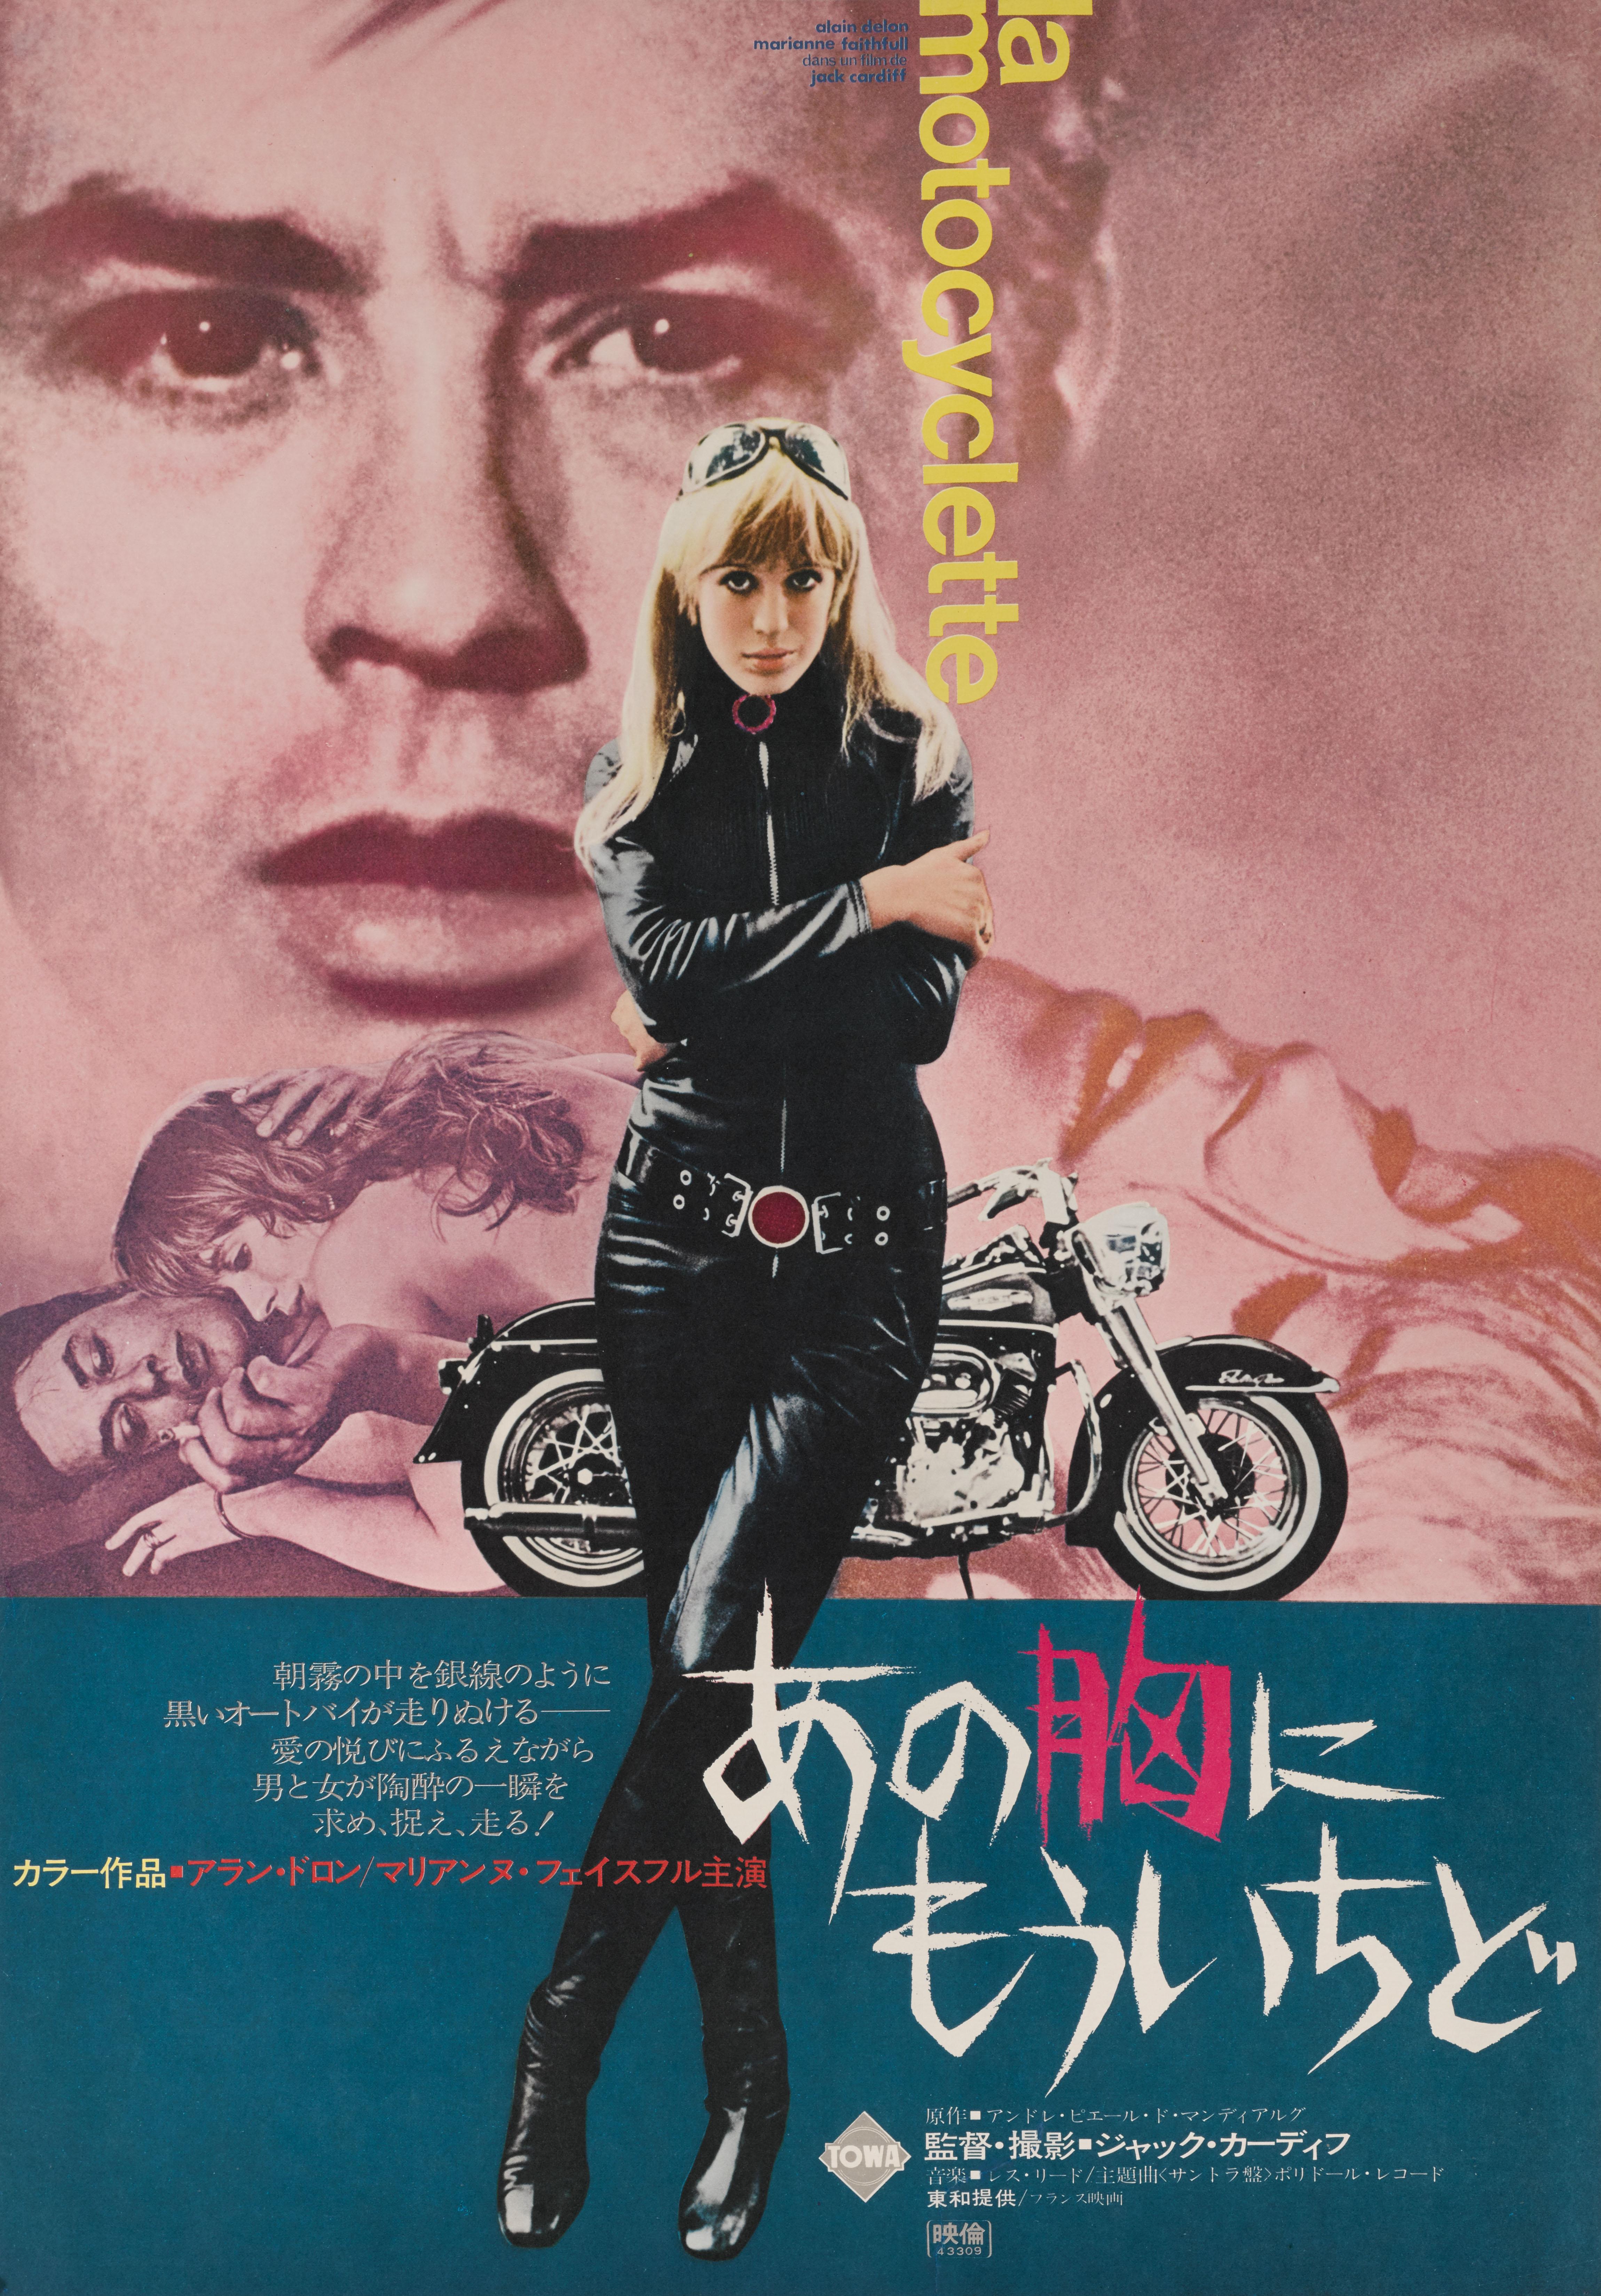 Original Japanese film poster from the 1968 film “The Girl on a Motorcycle”. The Art work on this Japanese poster is unique to the films Japans release. The film starred Marianne Faithfull, Alain Delon and was directed by Jack Cardiff.
The poster